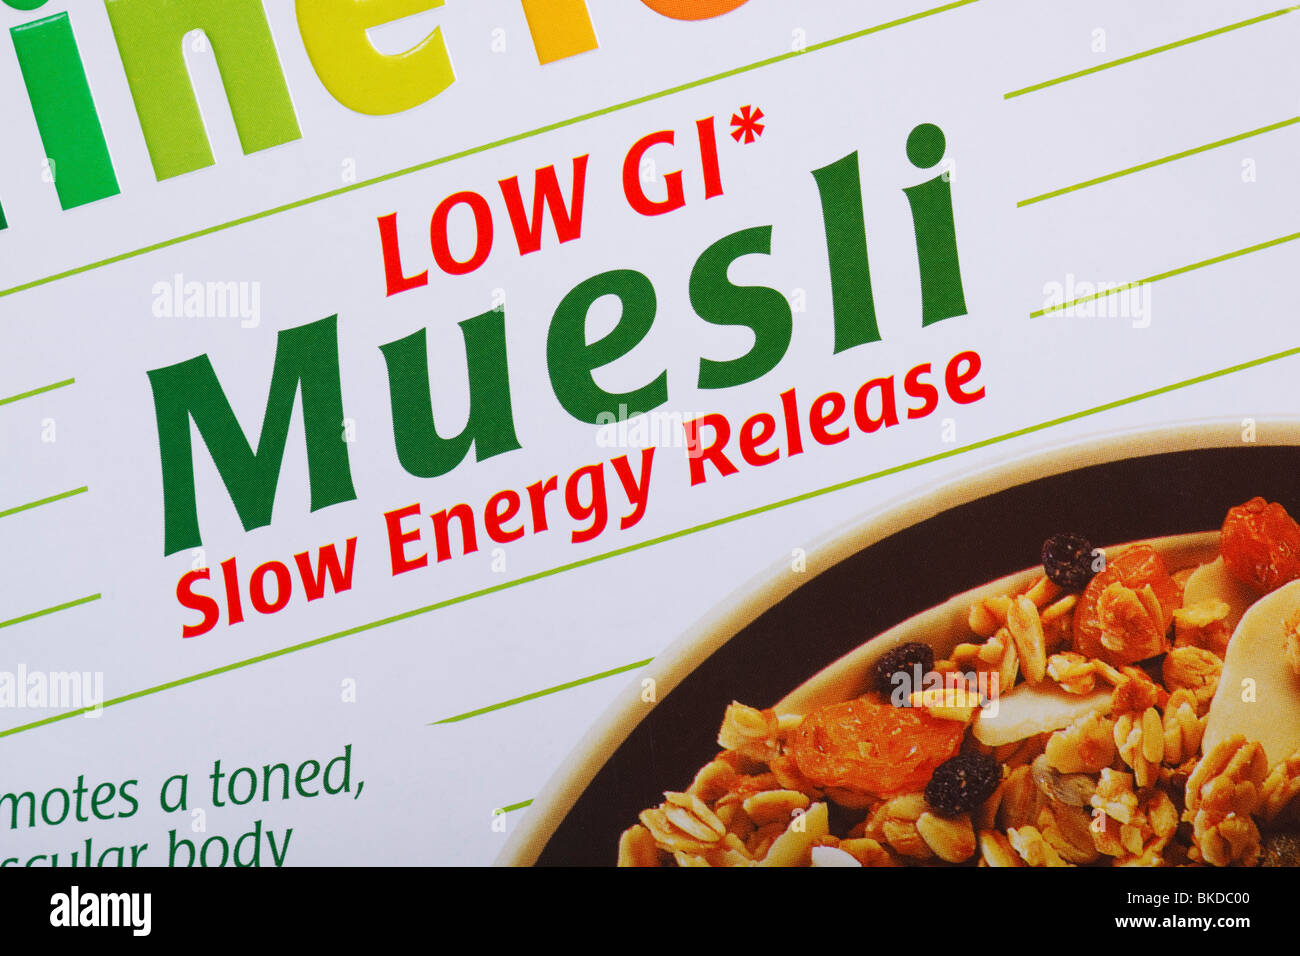 Box of muesli advertised as having a low glycemic index. Stock Photo